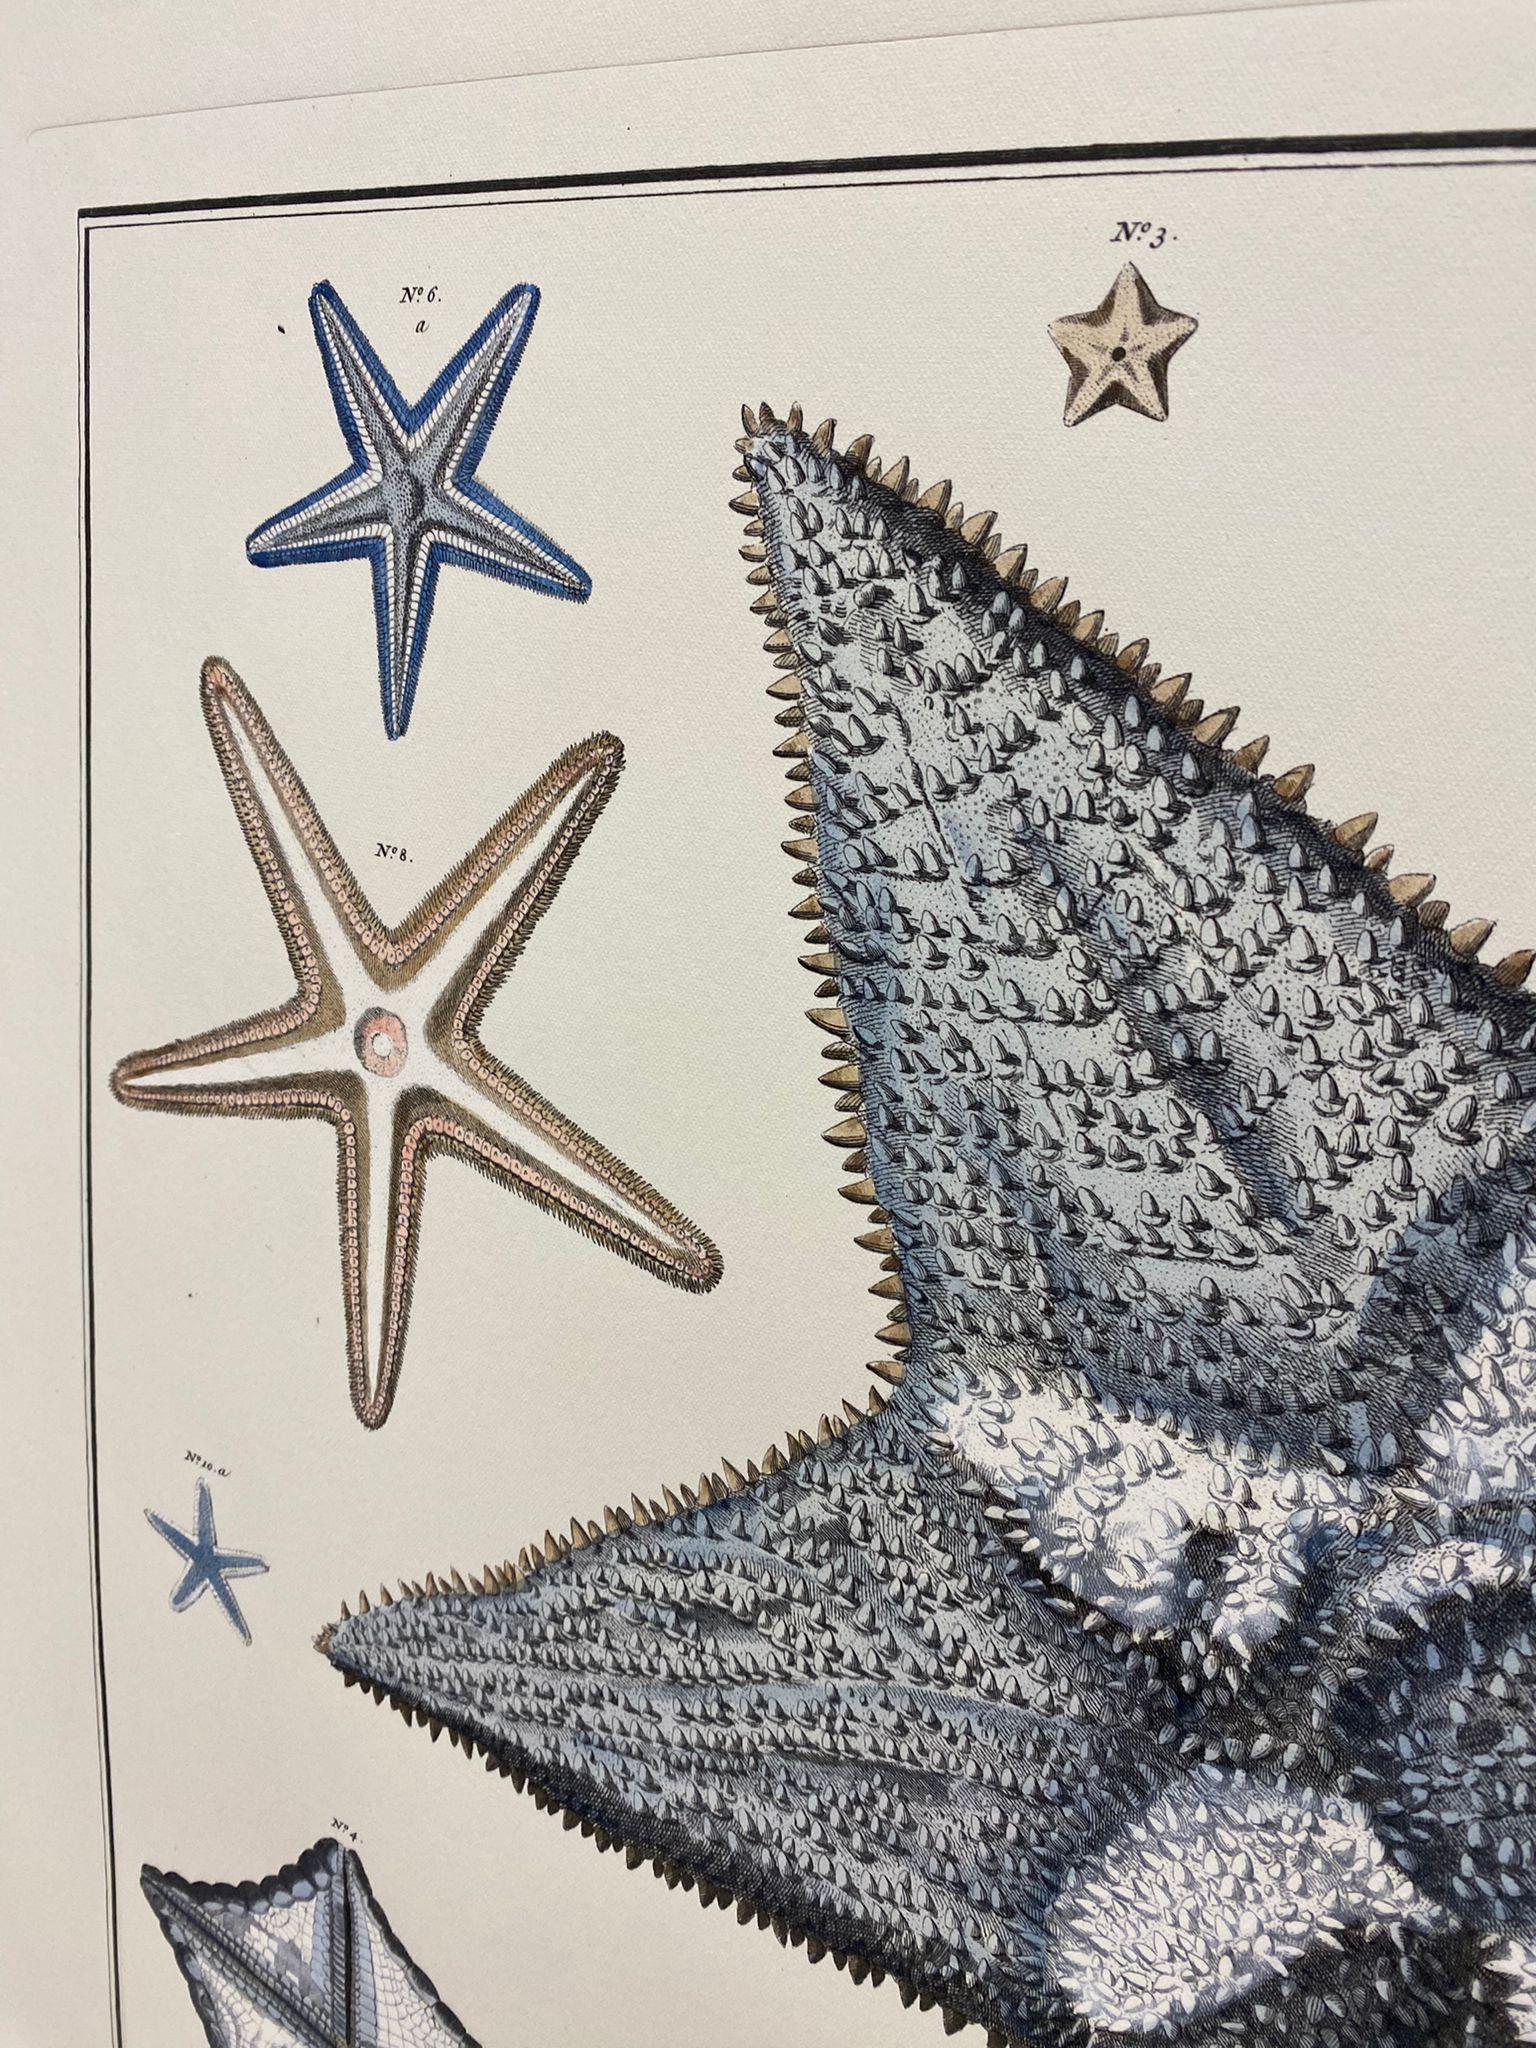 Elegant hand-watercoloured print representing Starfishs, from the Japanese Sea Life Series
This marine style print is available in 2 different natural representations to create a bright and joyful composition.

Paper dimension 70 x 59 cm
Drawing